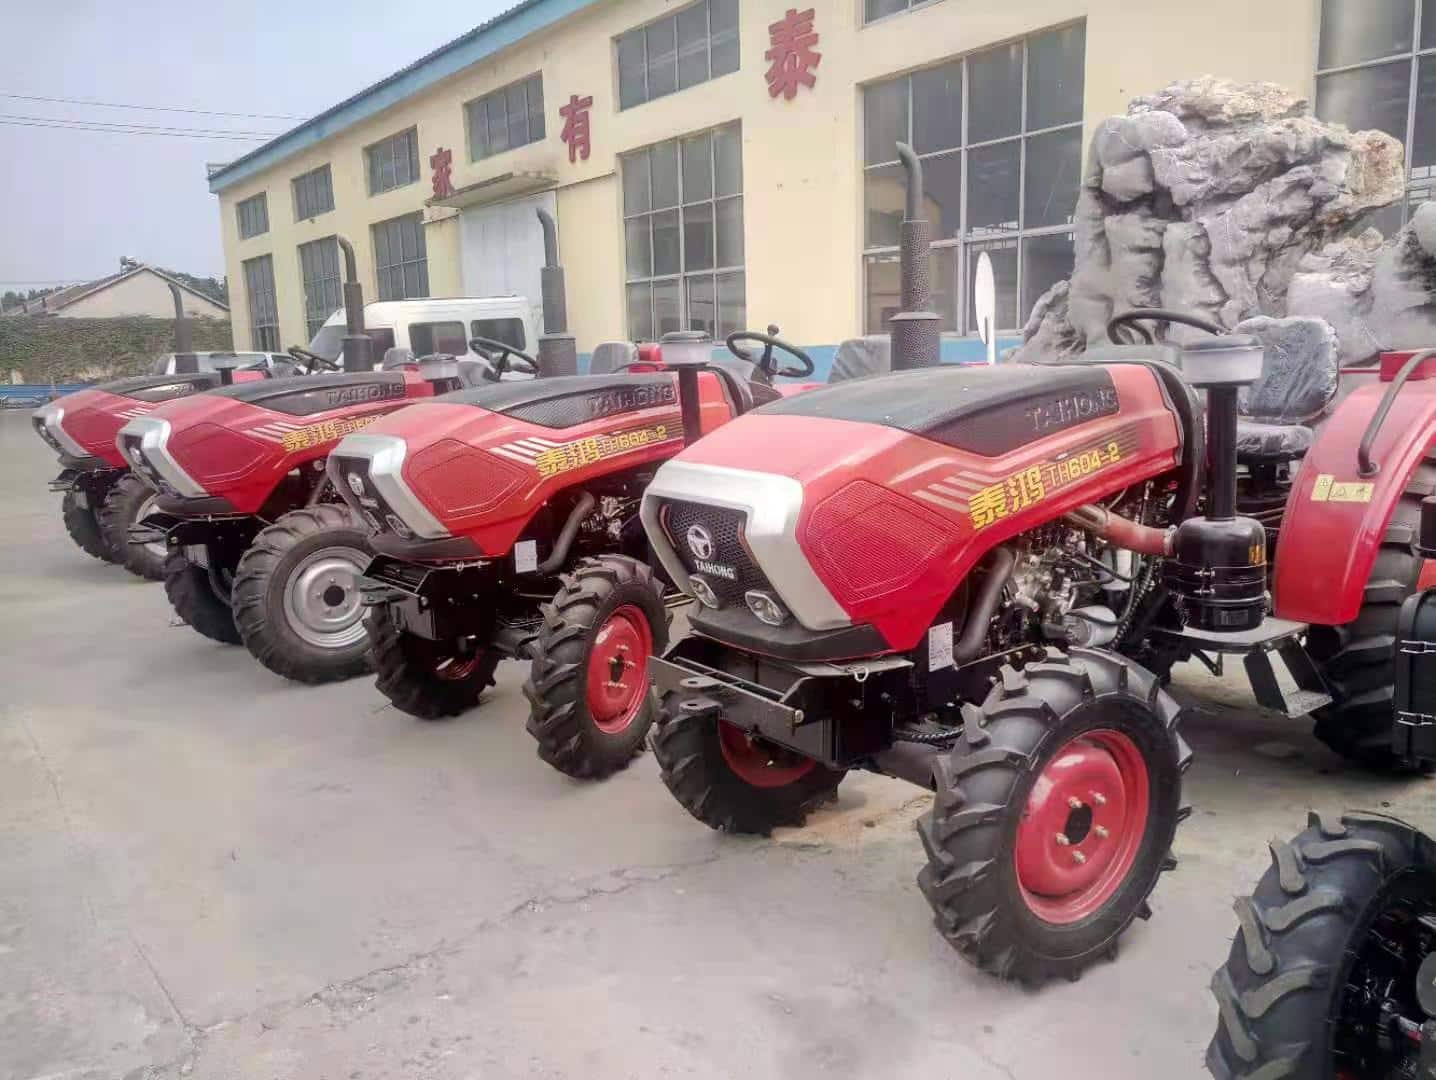 China Factory Supply 45HP 4WD Mini Garden Orchard Agricultural Farm Tractor